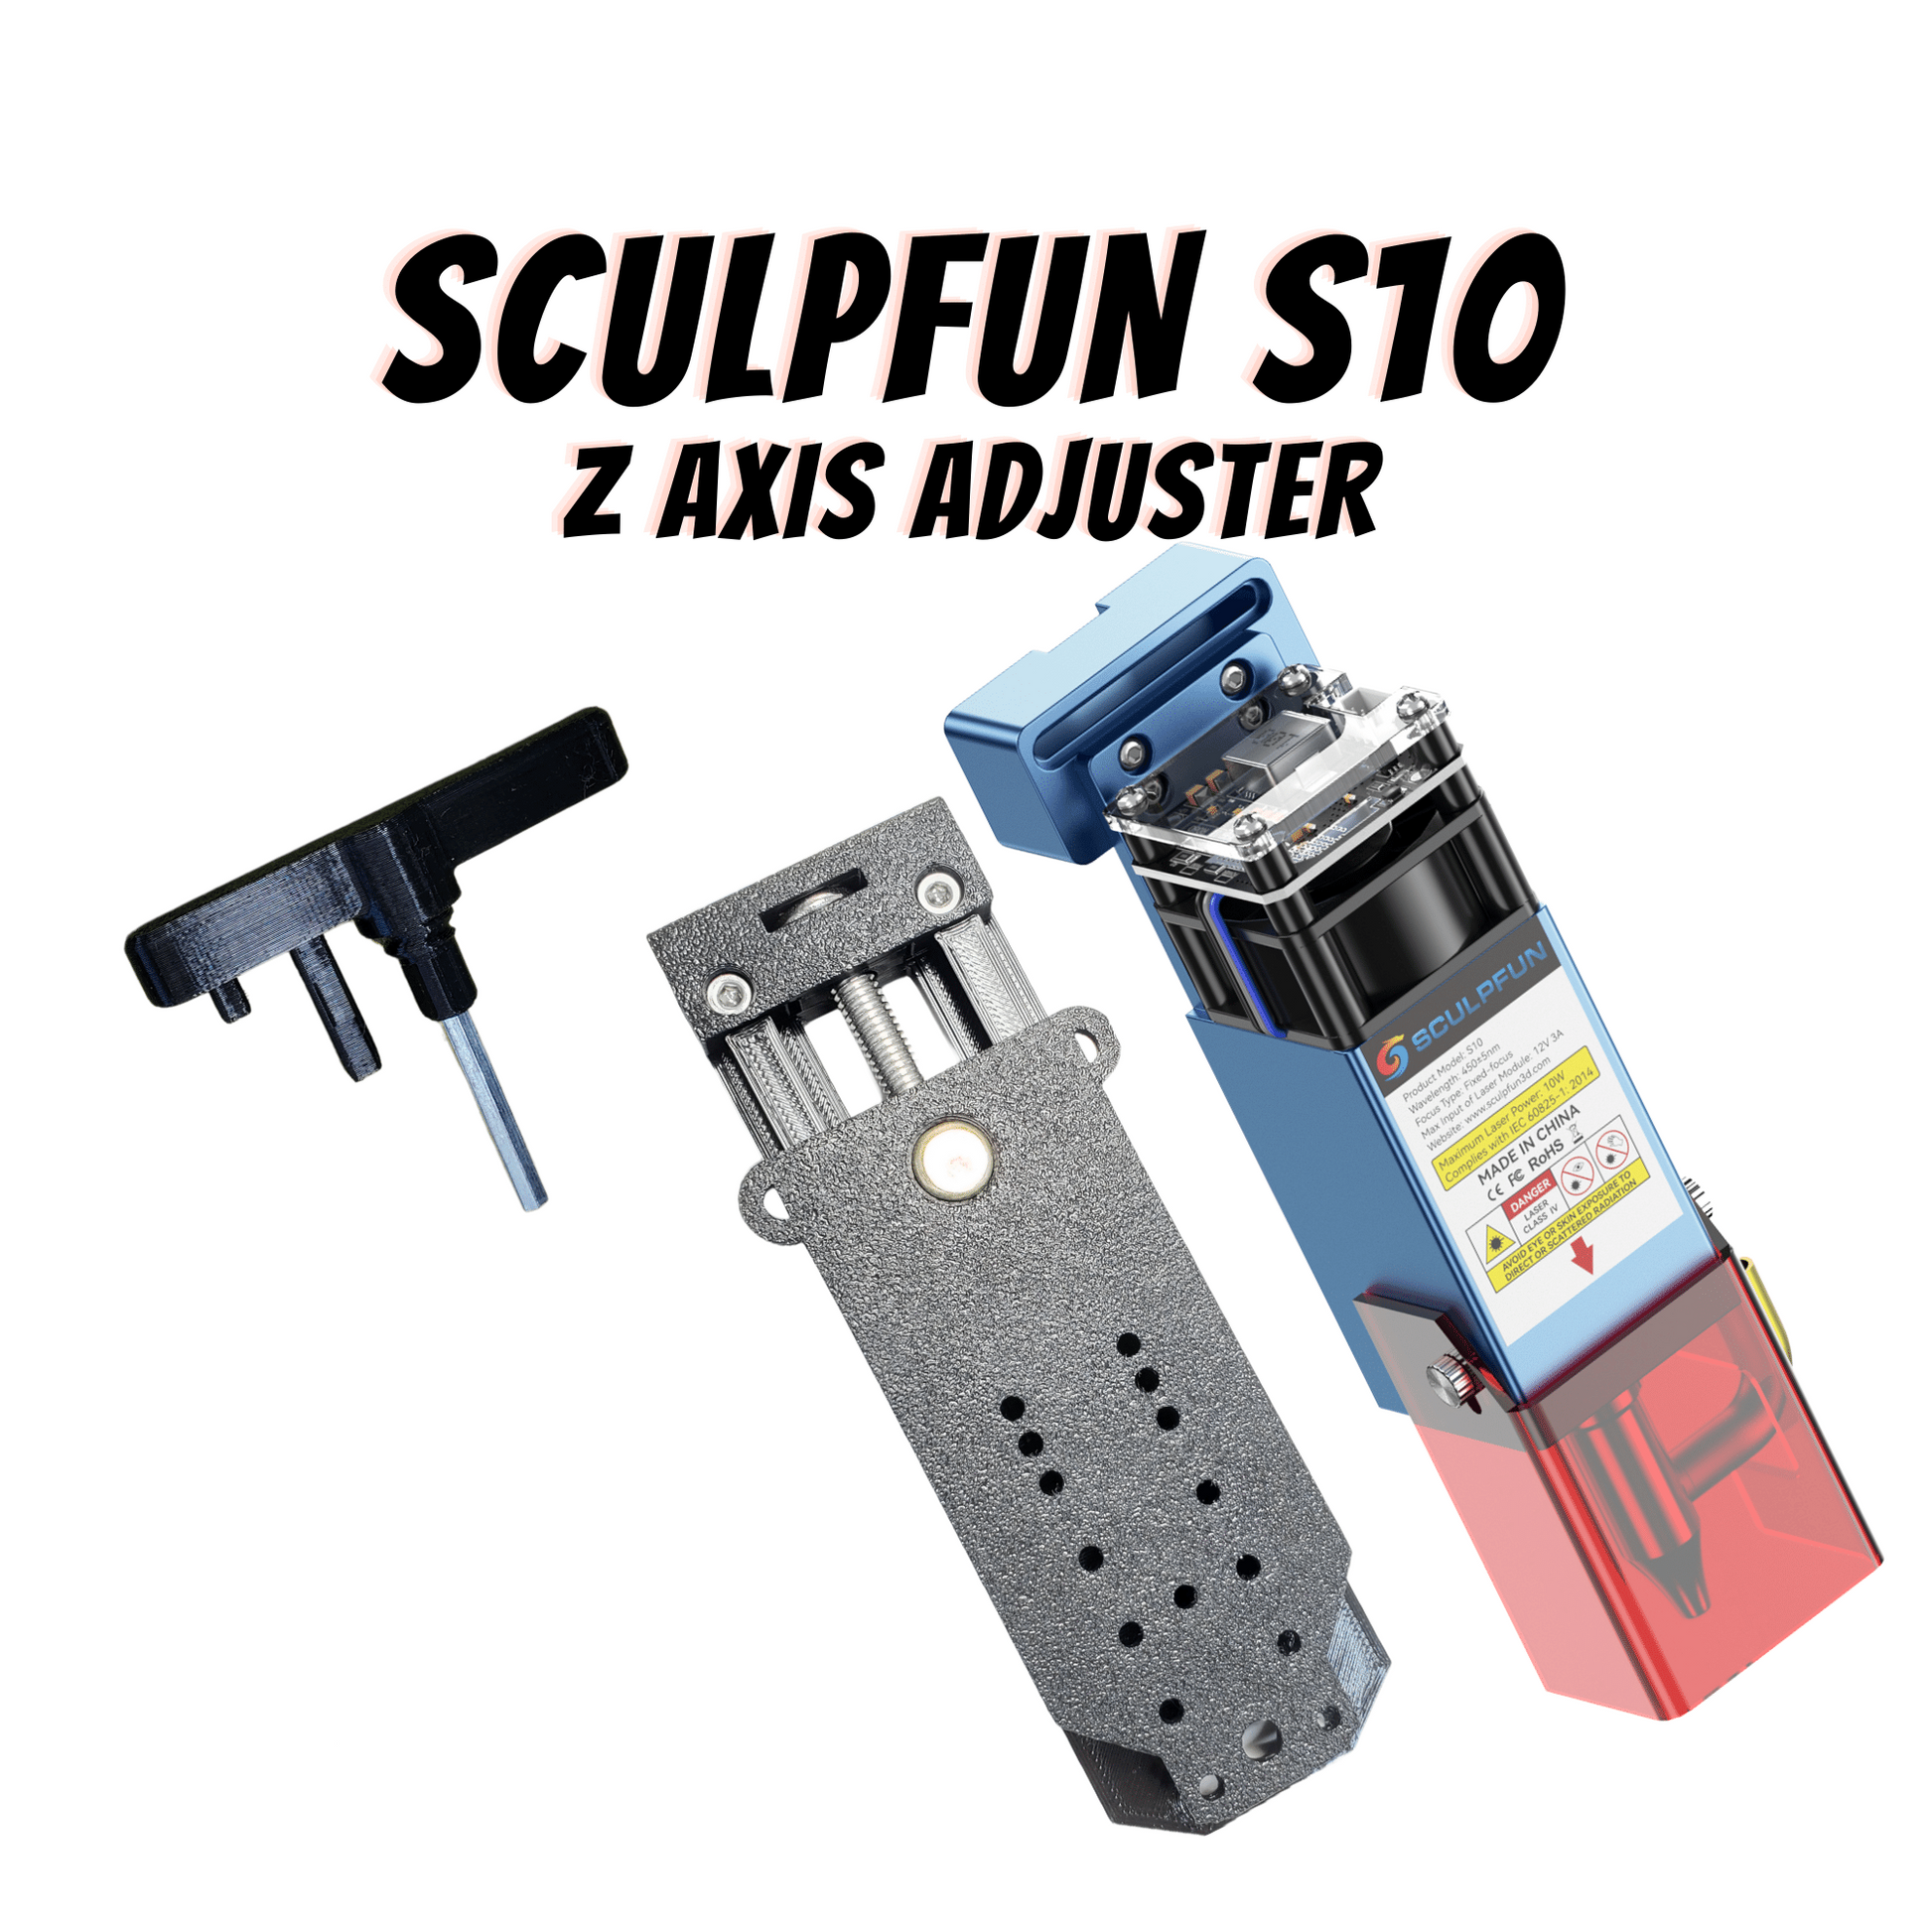 Sculpfun S10 Z Axis Height Adjuster by King Gubby